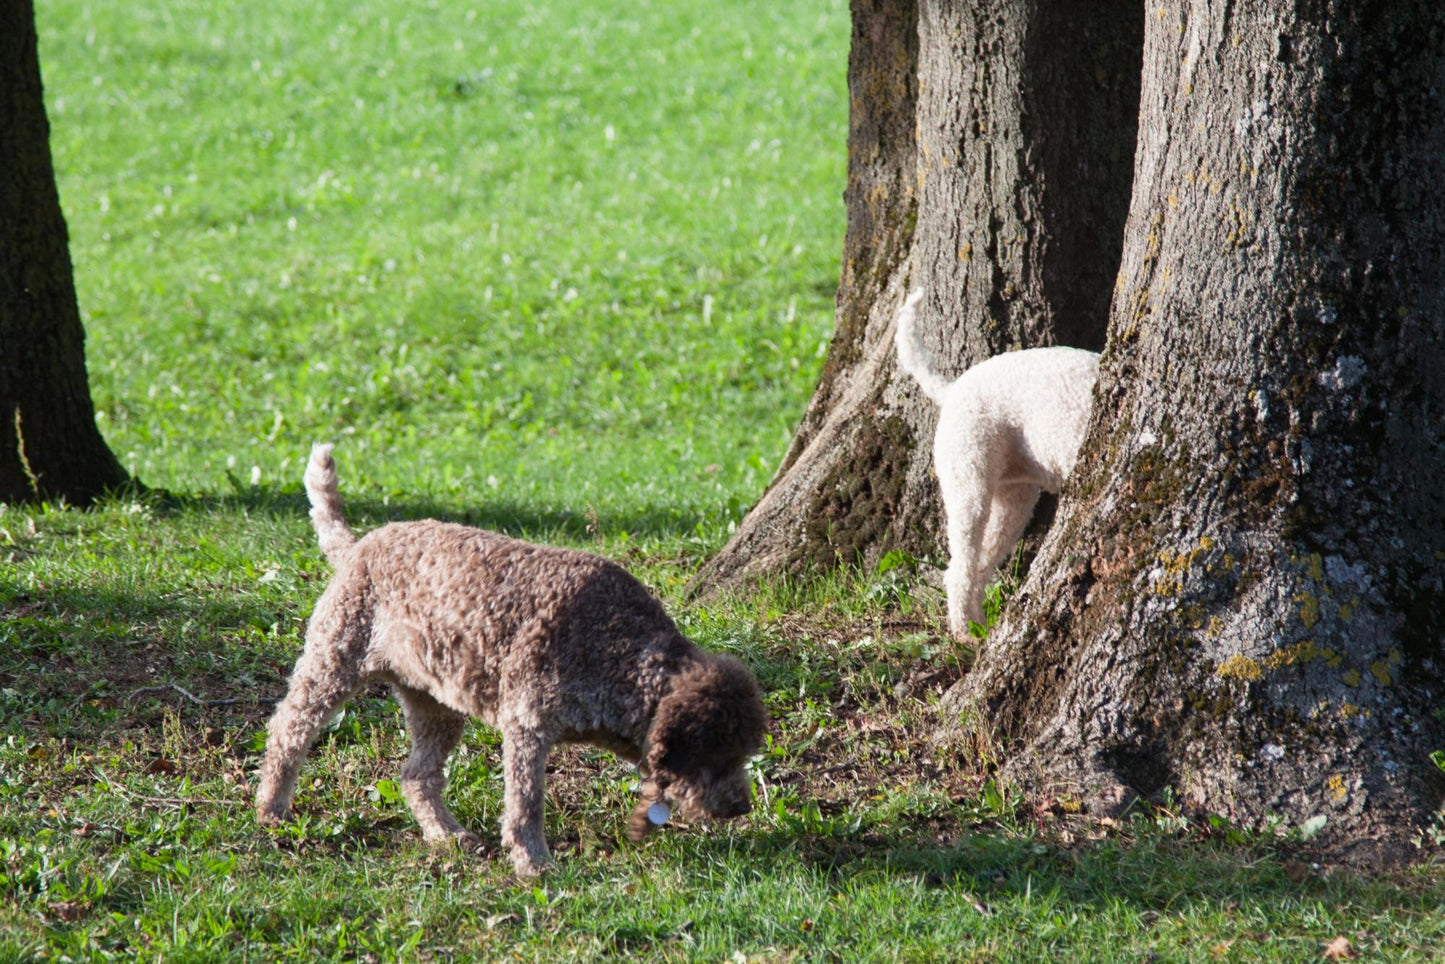 4_claim of cavage including your training and dressage of your dog looking for truffles